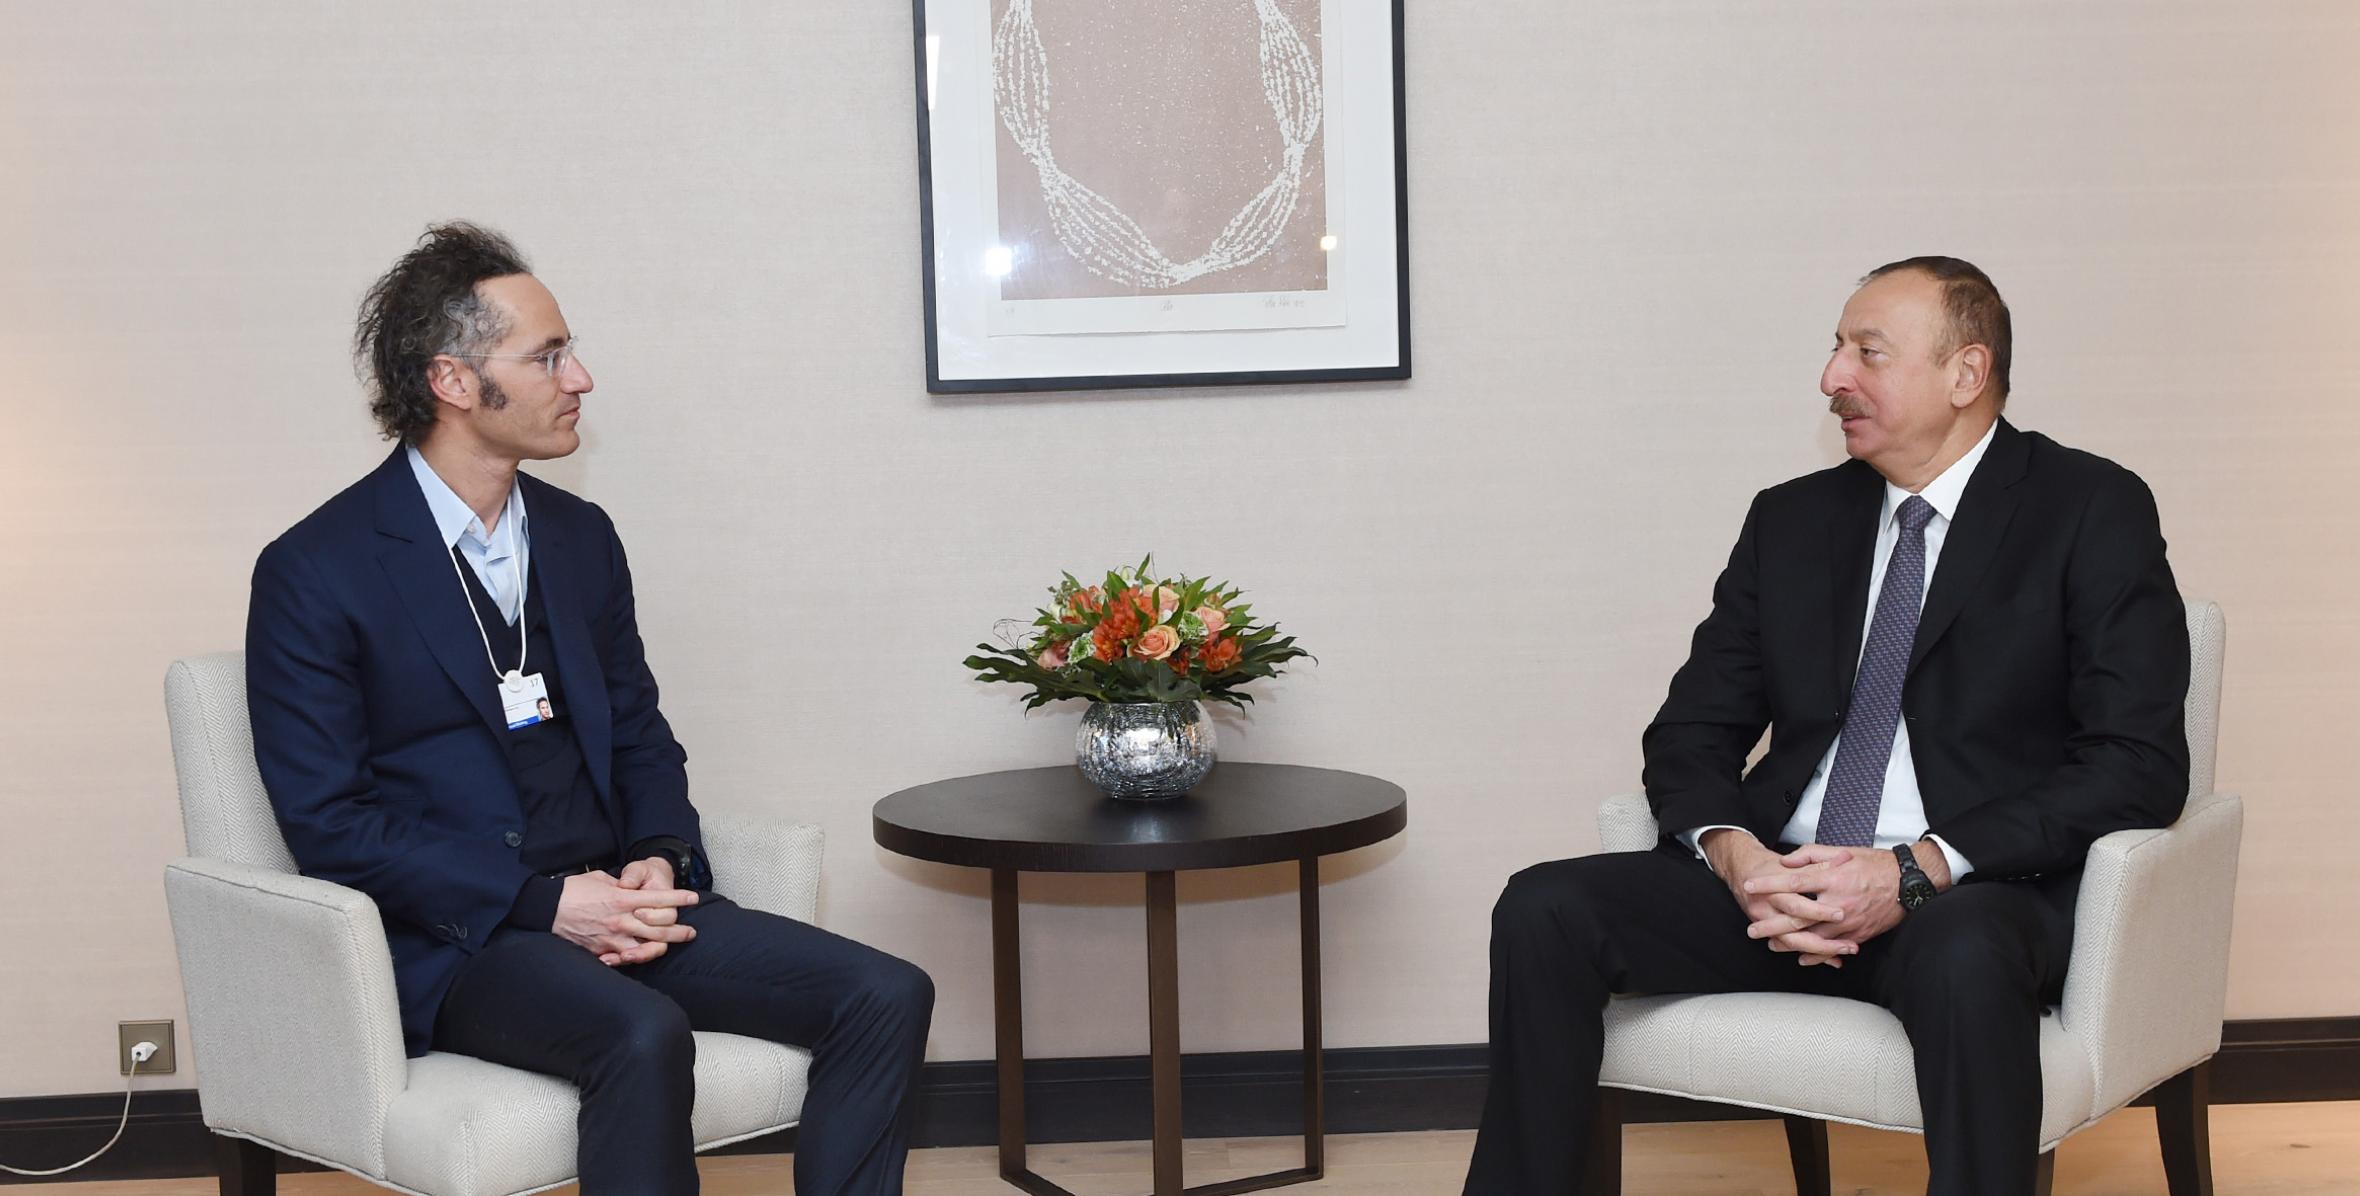 Ilham Aliyev met with Chief Executive Officer and co-founder of Palantir Technologies in Davos